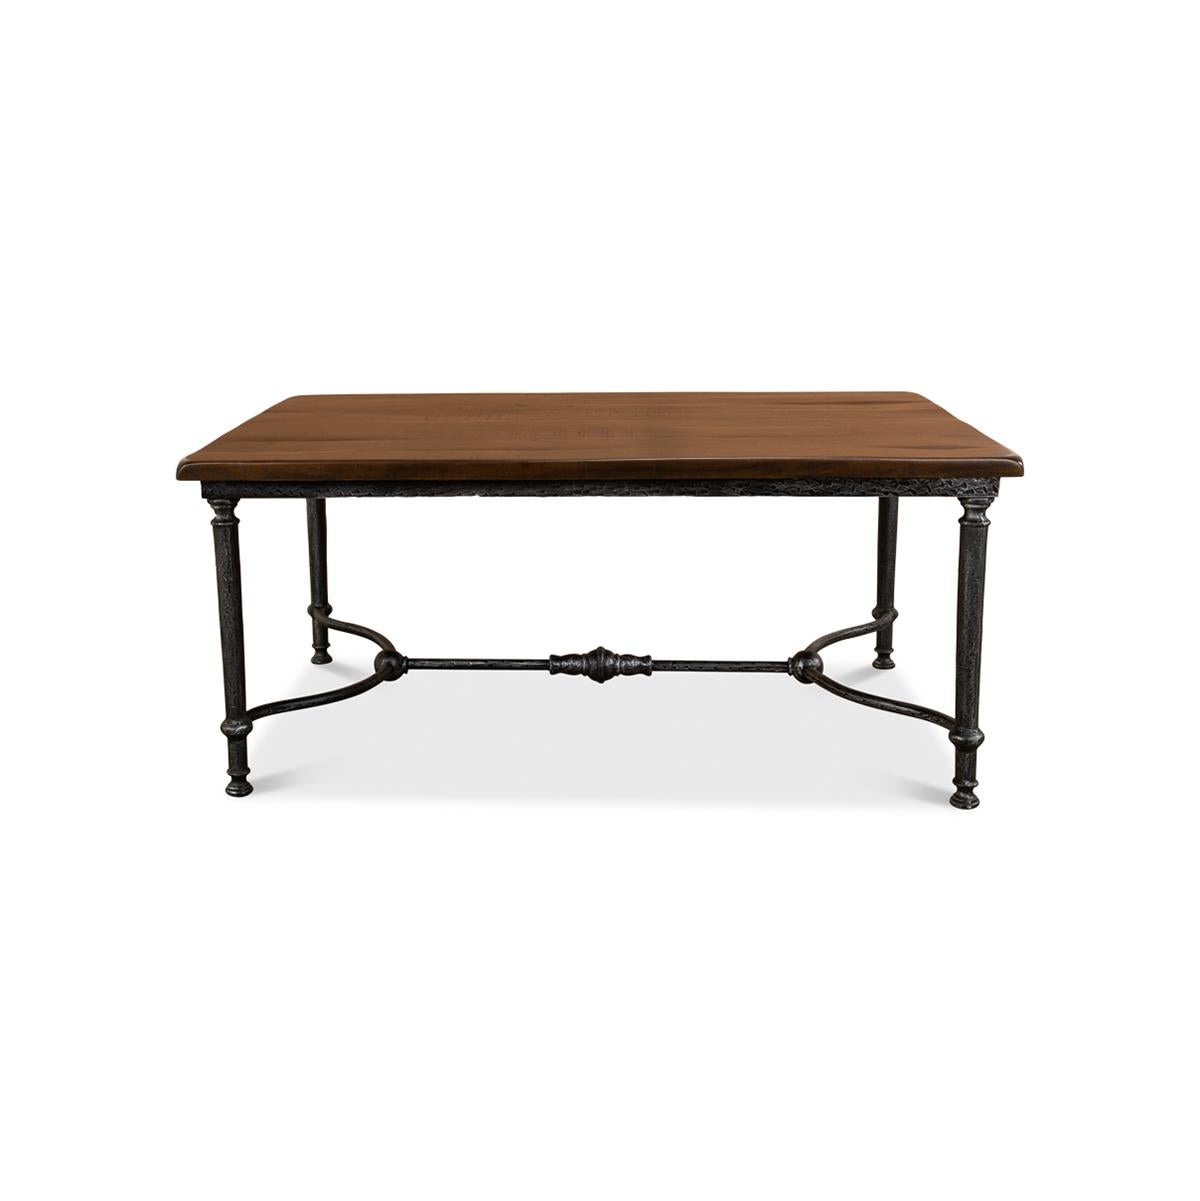 Ideal for a less formal lifestyle, this hand- crafted table features a top of reclaimed wood planks joined to a wrought iron base with a natural finish. With its measurements, this substantial piece provides ample surface and the comfortable feel of